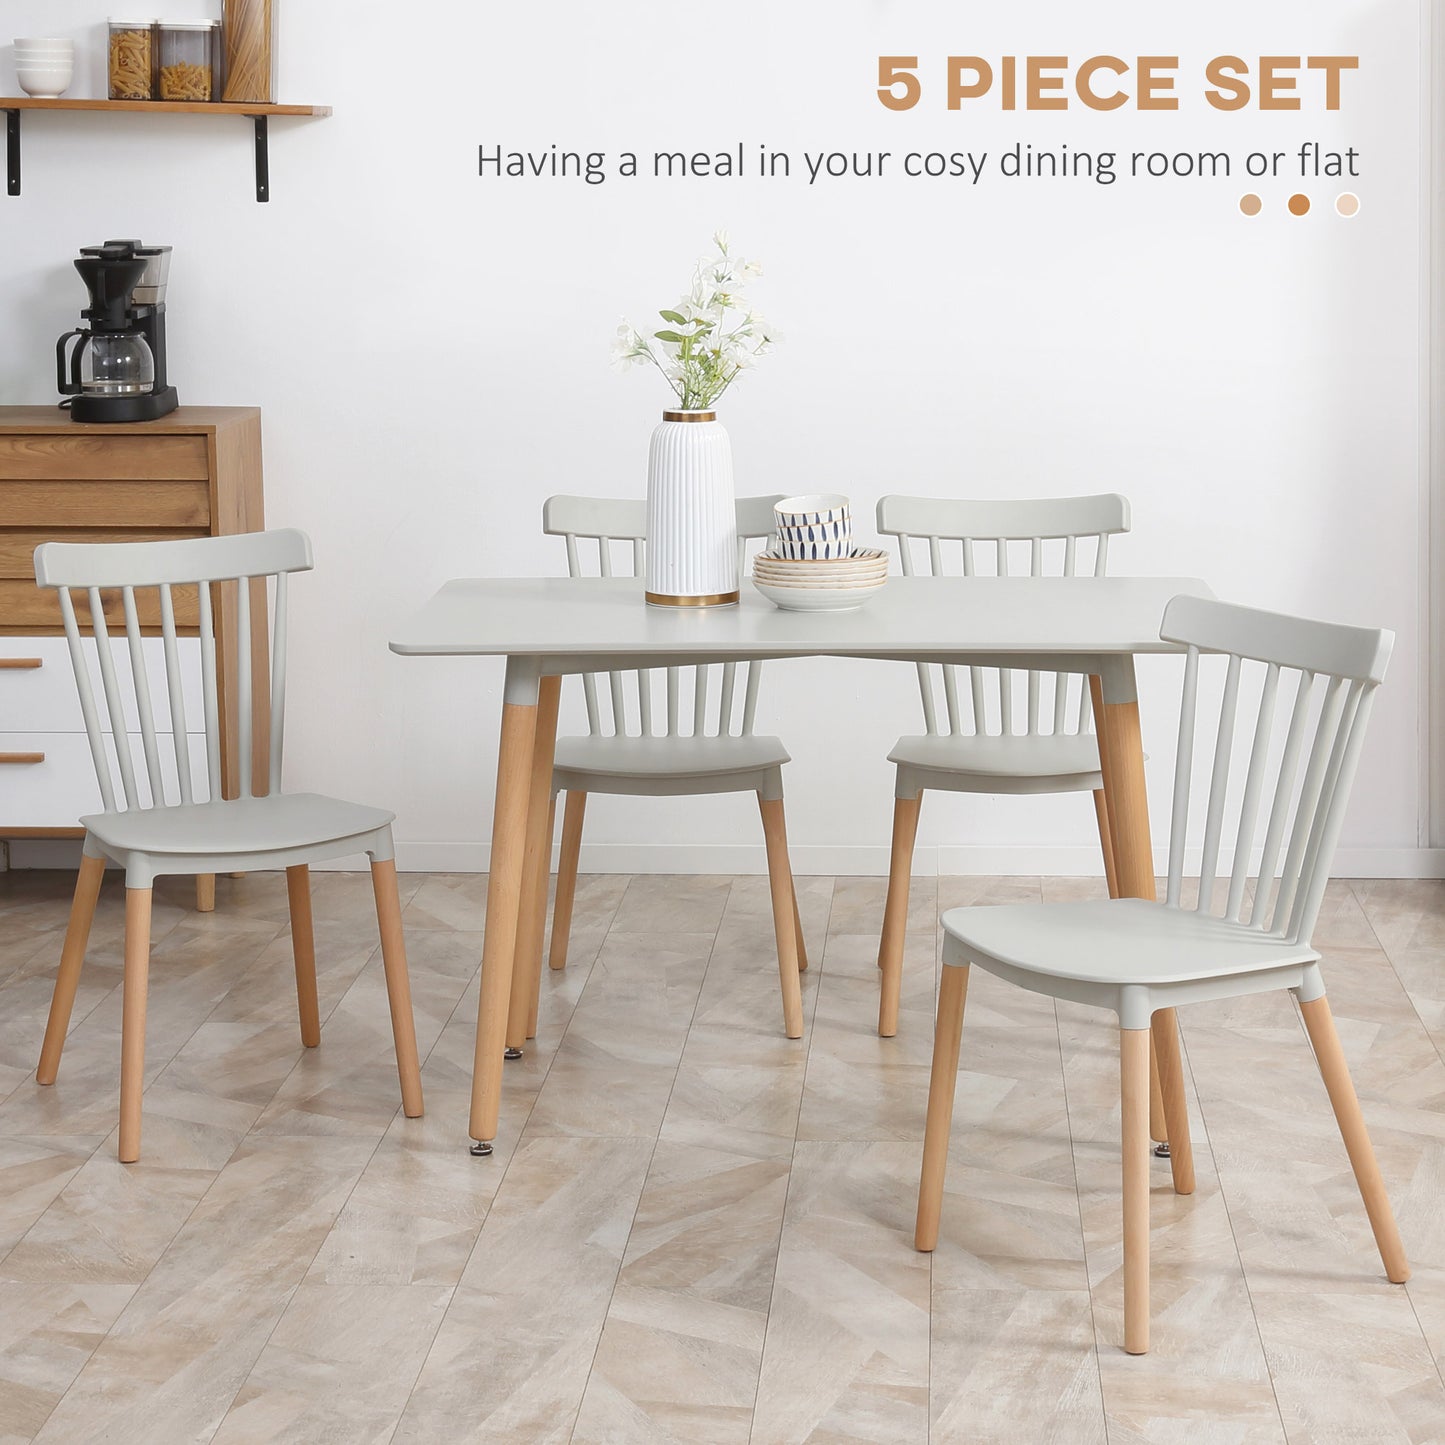 HOMCOM 5 Piece Dining Table Set with Beech Wood Legs Space Saving Table and 4 Chairs for Small Kitchens Grey